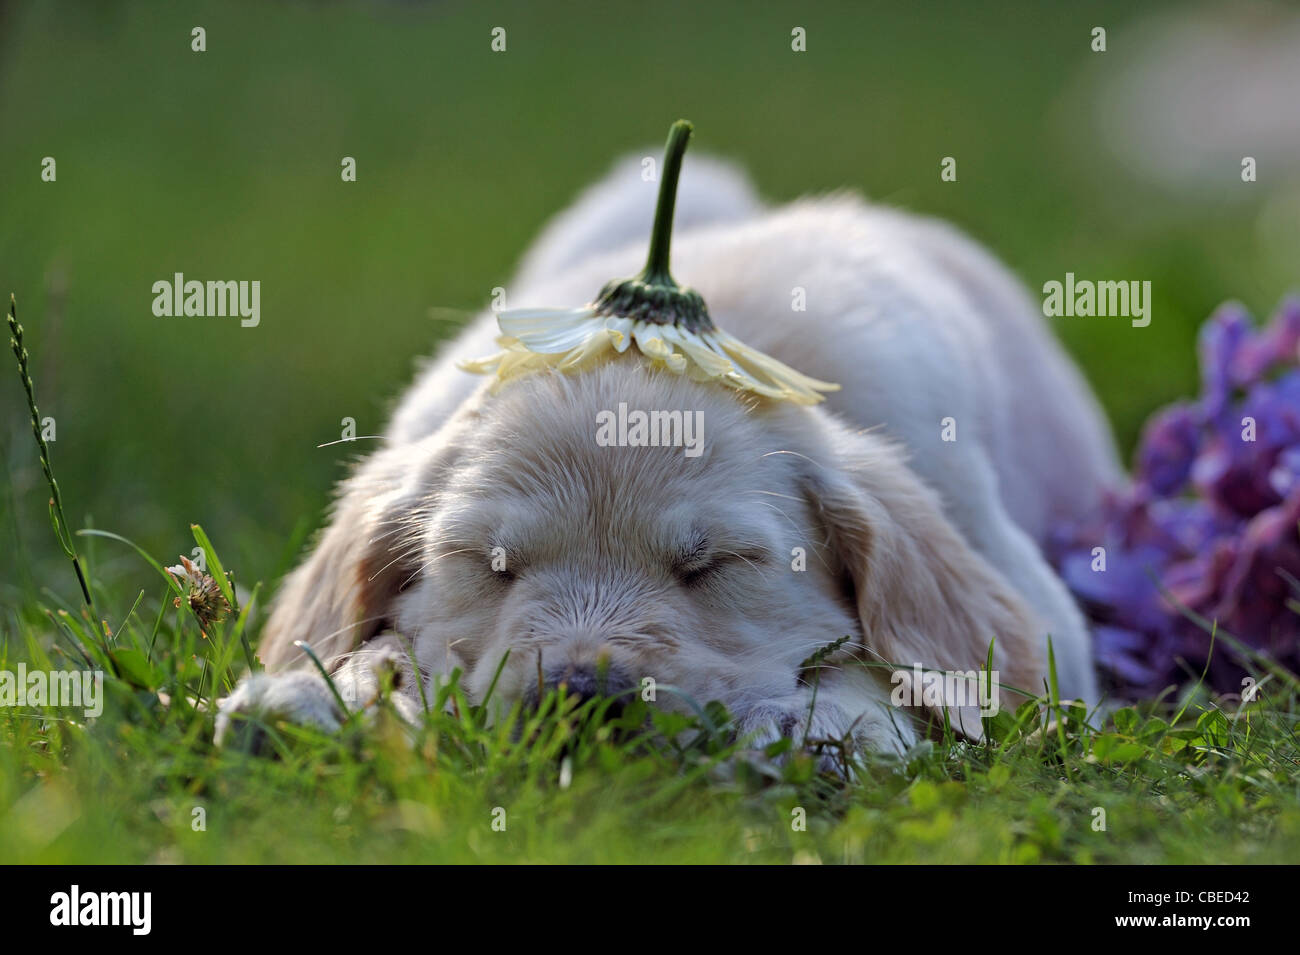 Golden Retriever (Canis lupus familiaris). Puppy sleeping with an inverted flower as a cap on its head. Stock Photo